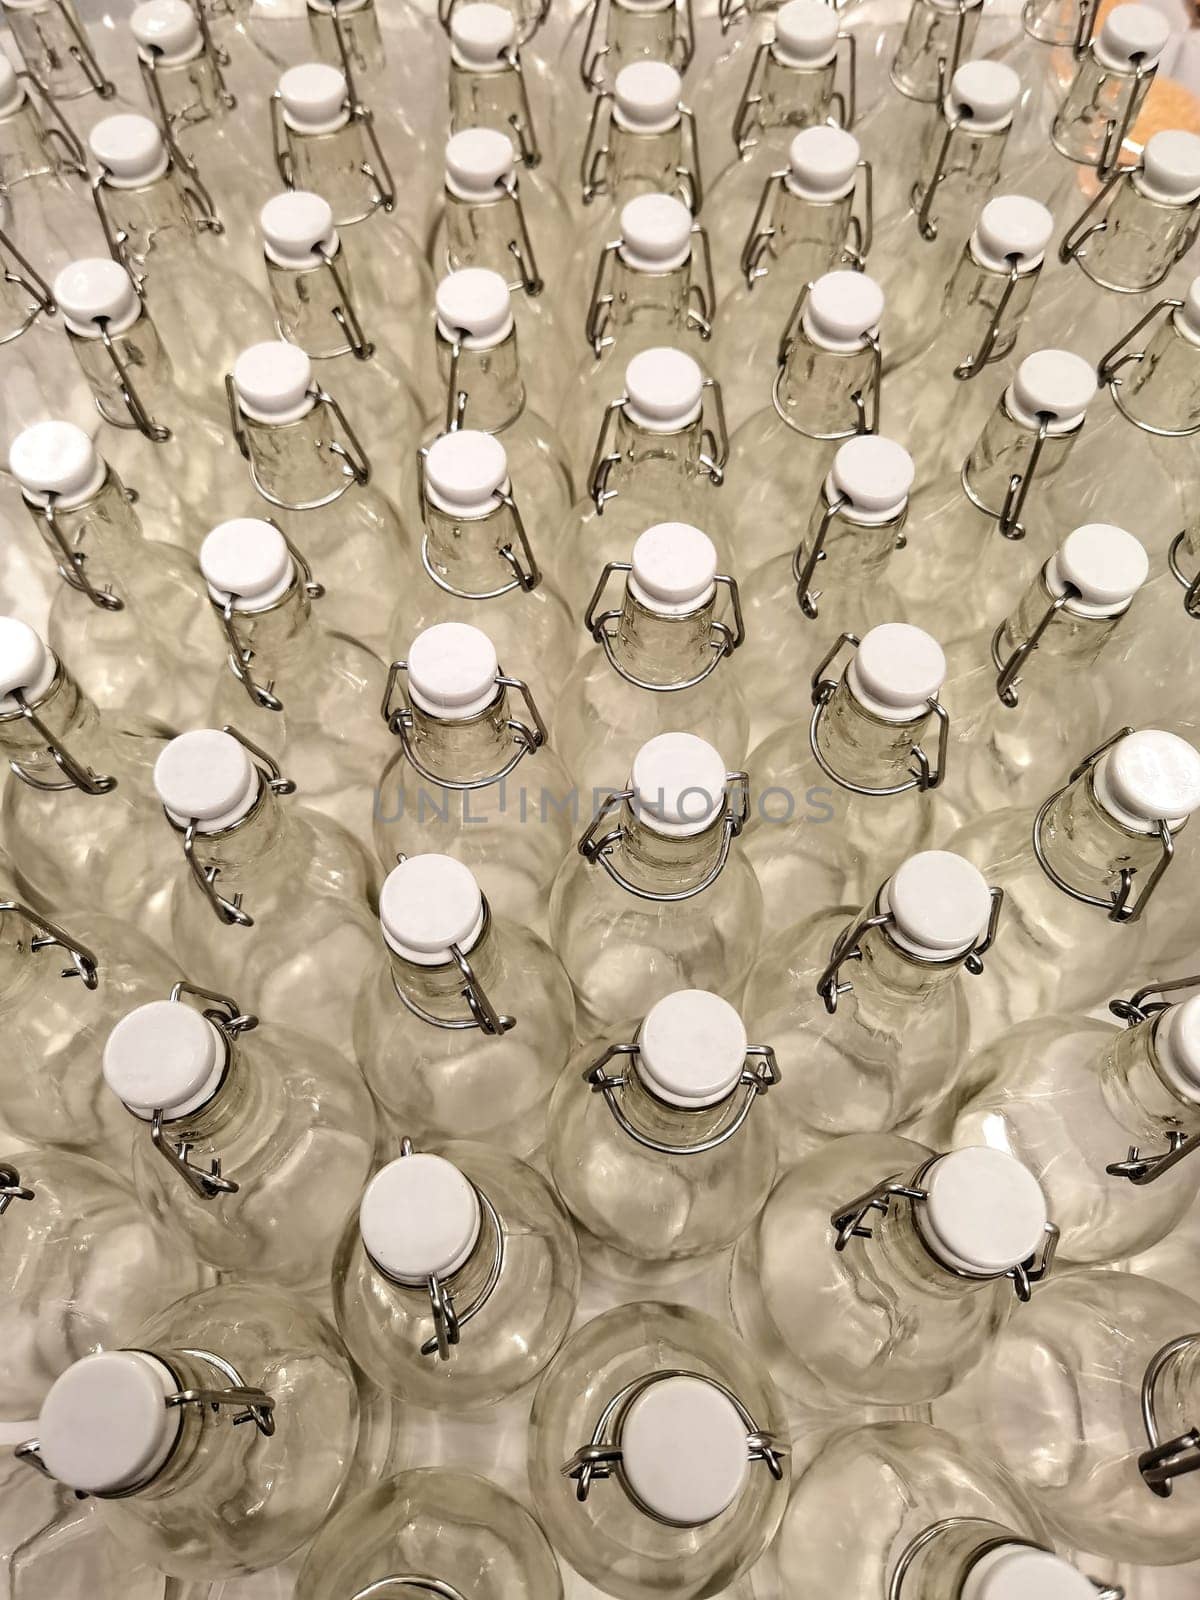 View of many empty glass bottle from above by EdVal